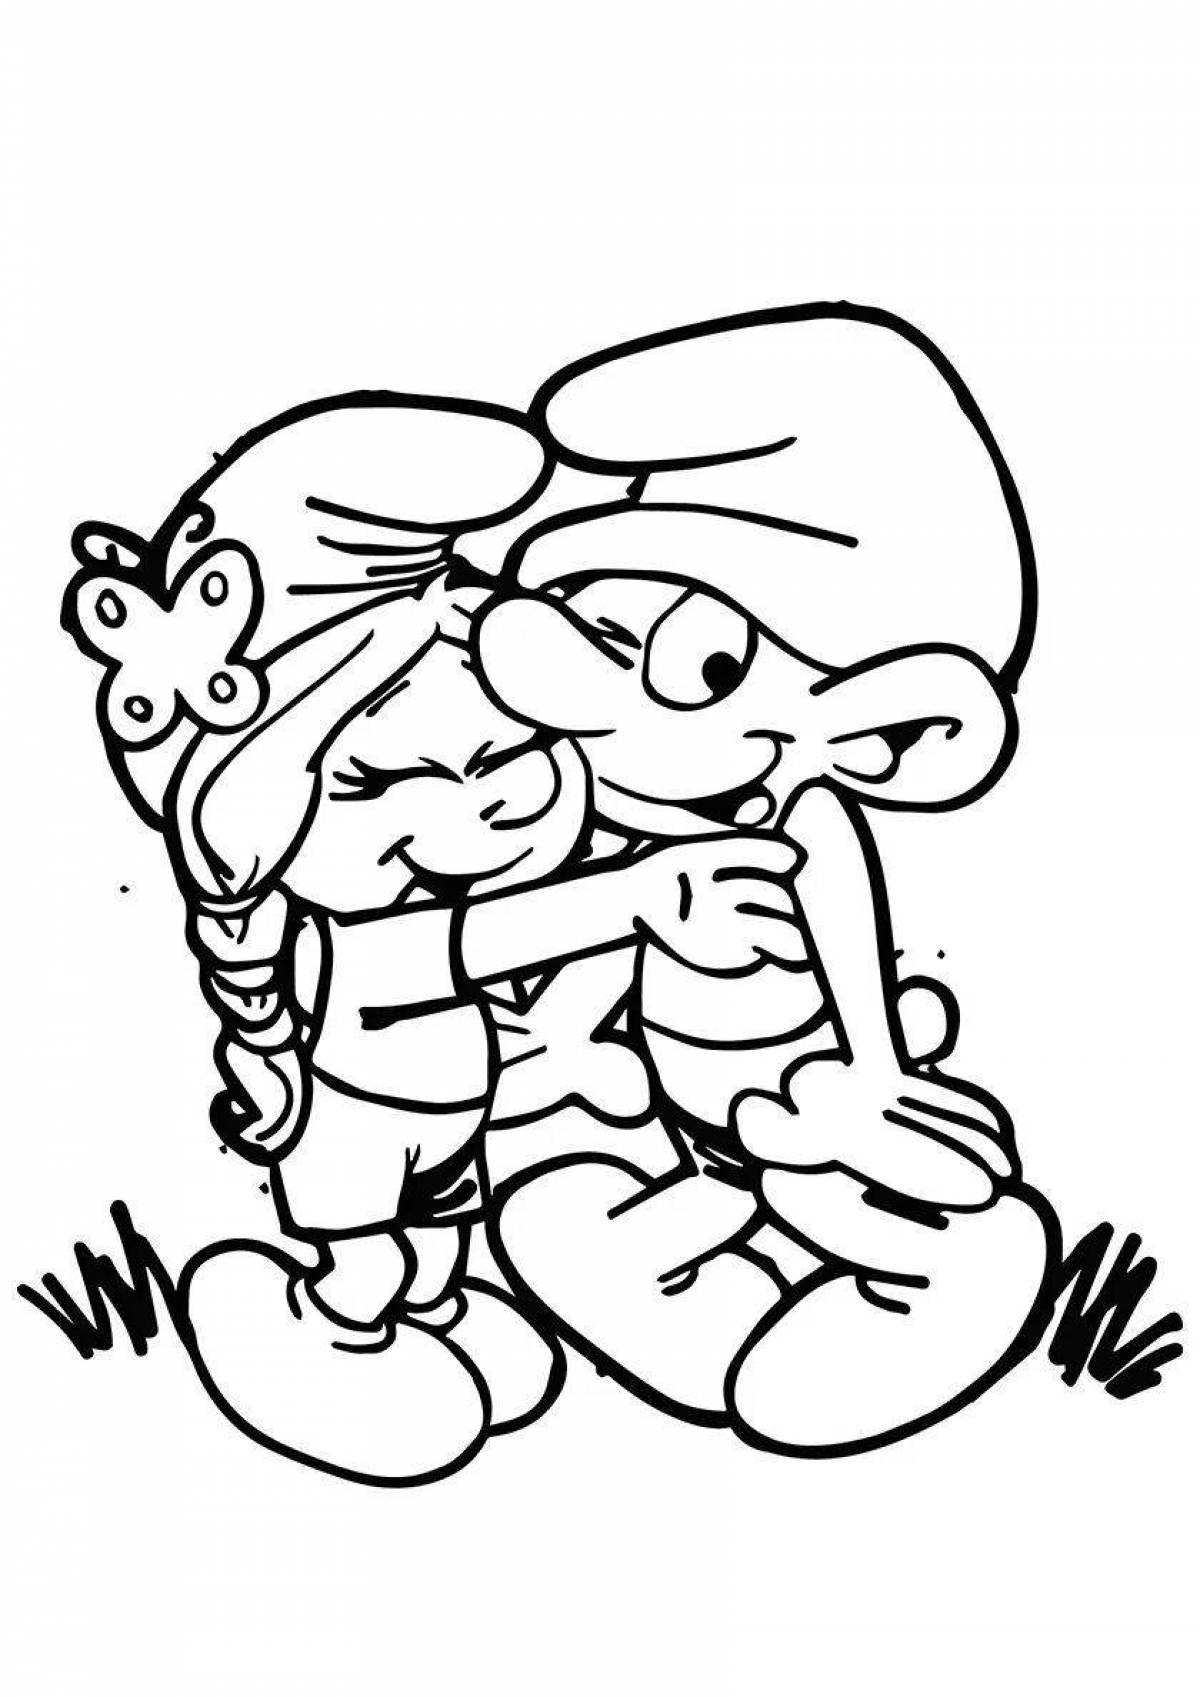 Coloring hugs with love